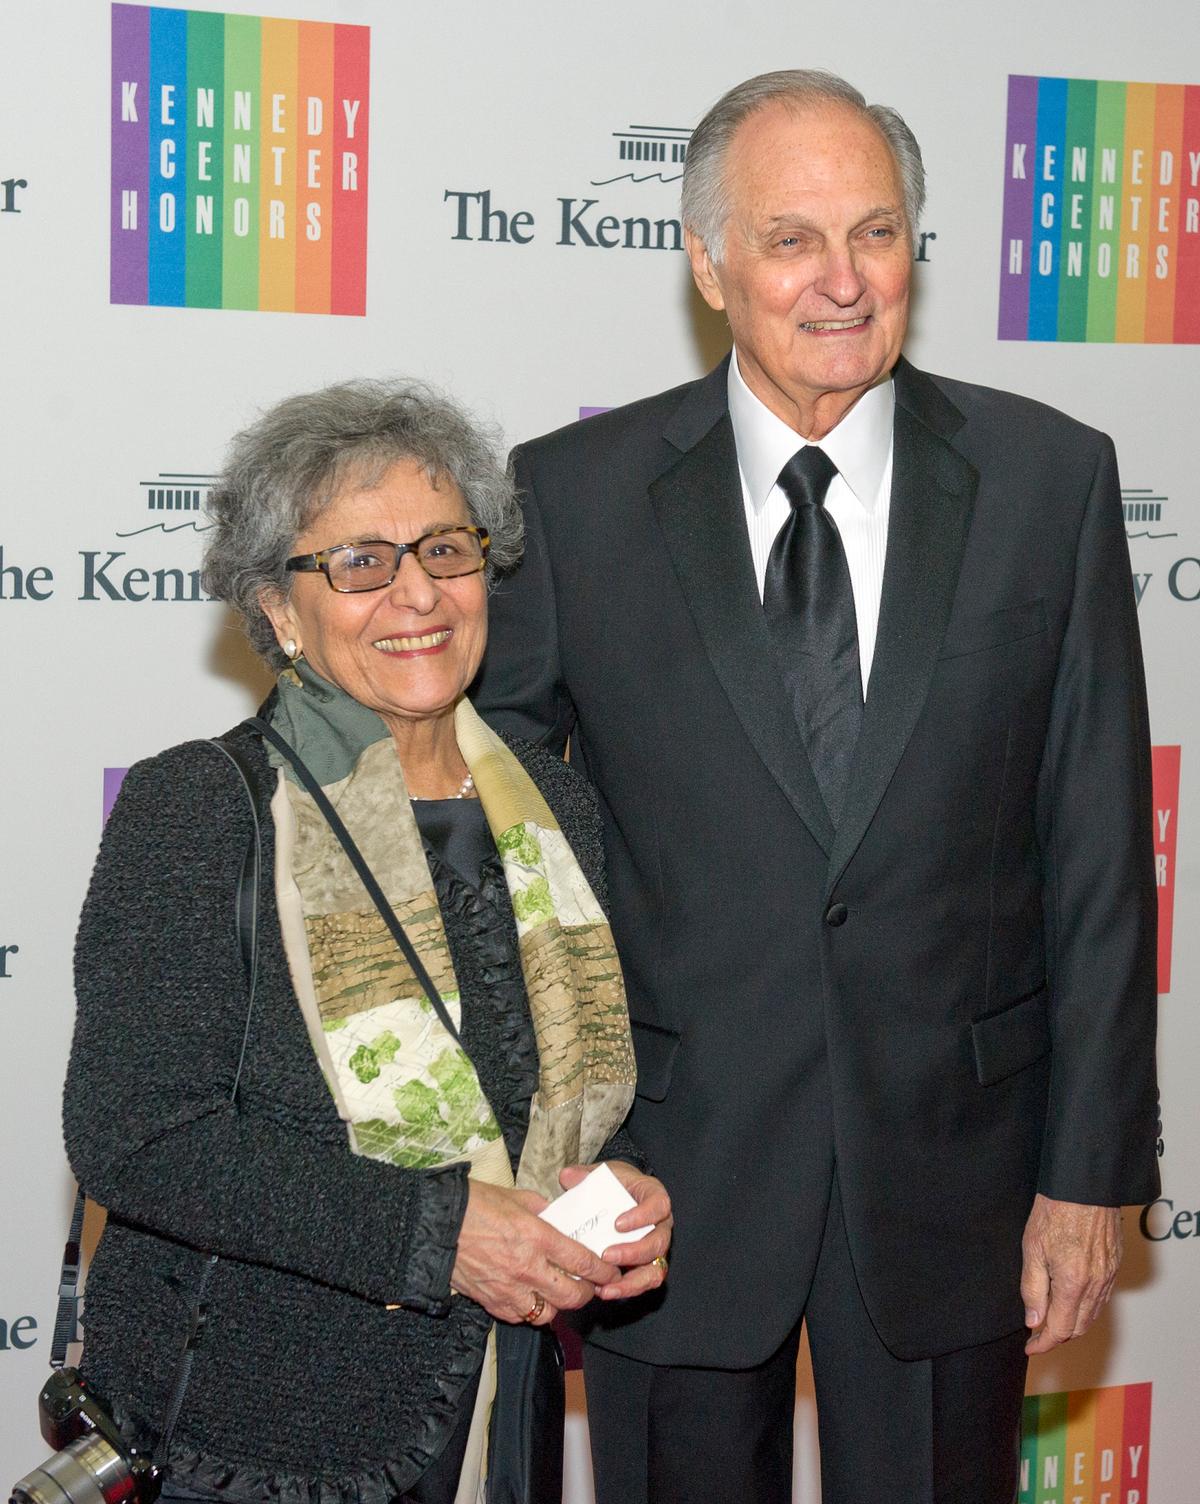 Arlene Alda and Alan Alda arrive at the formal Artist's Dinner honoring the recipients of the 2013 Kennedy Center Honors. (Ron Sachs-Pool/Getty Images)